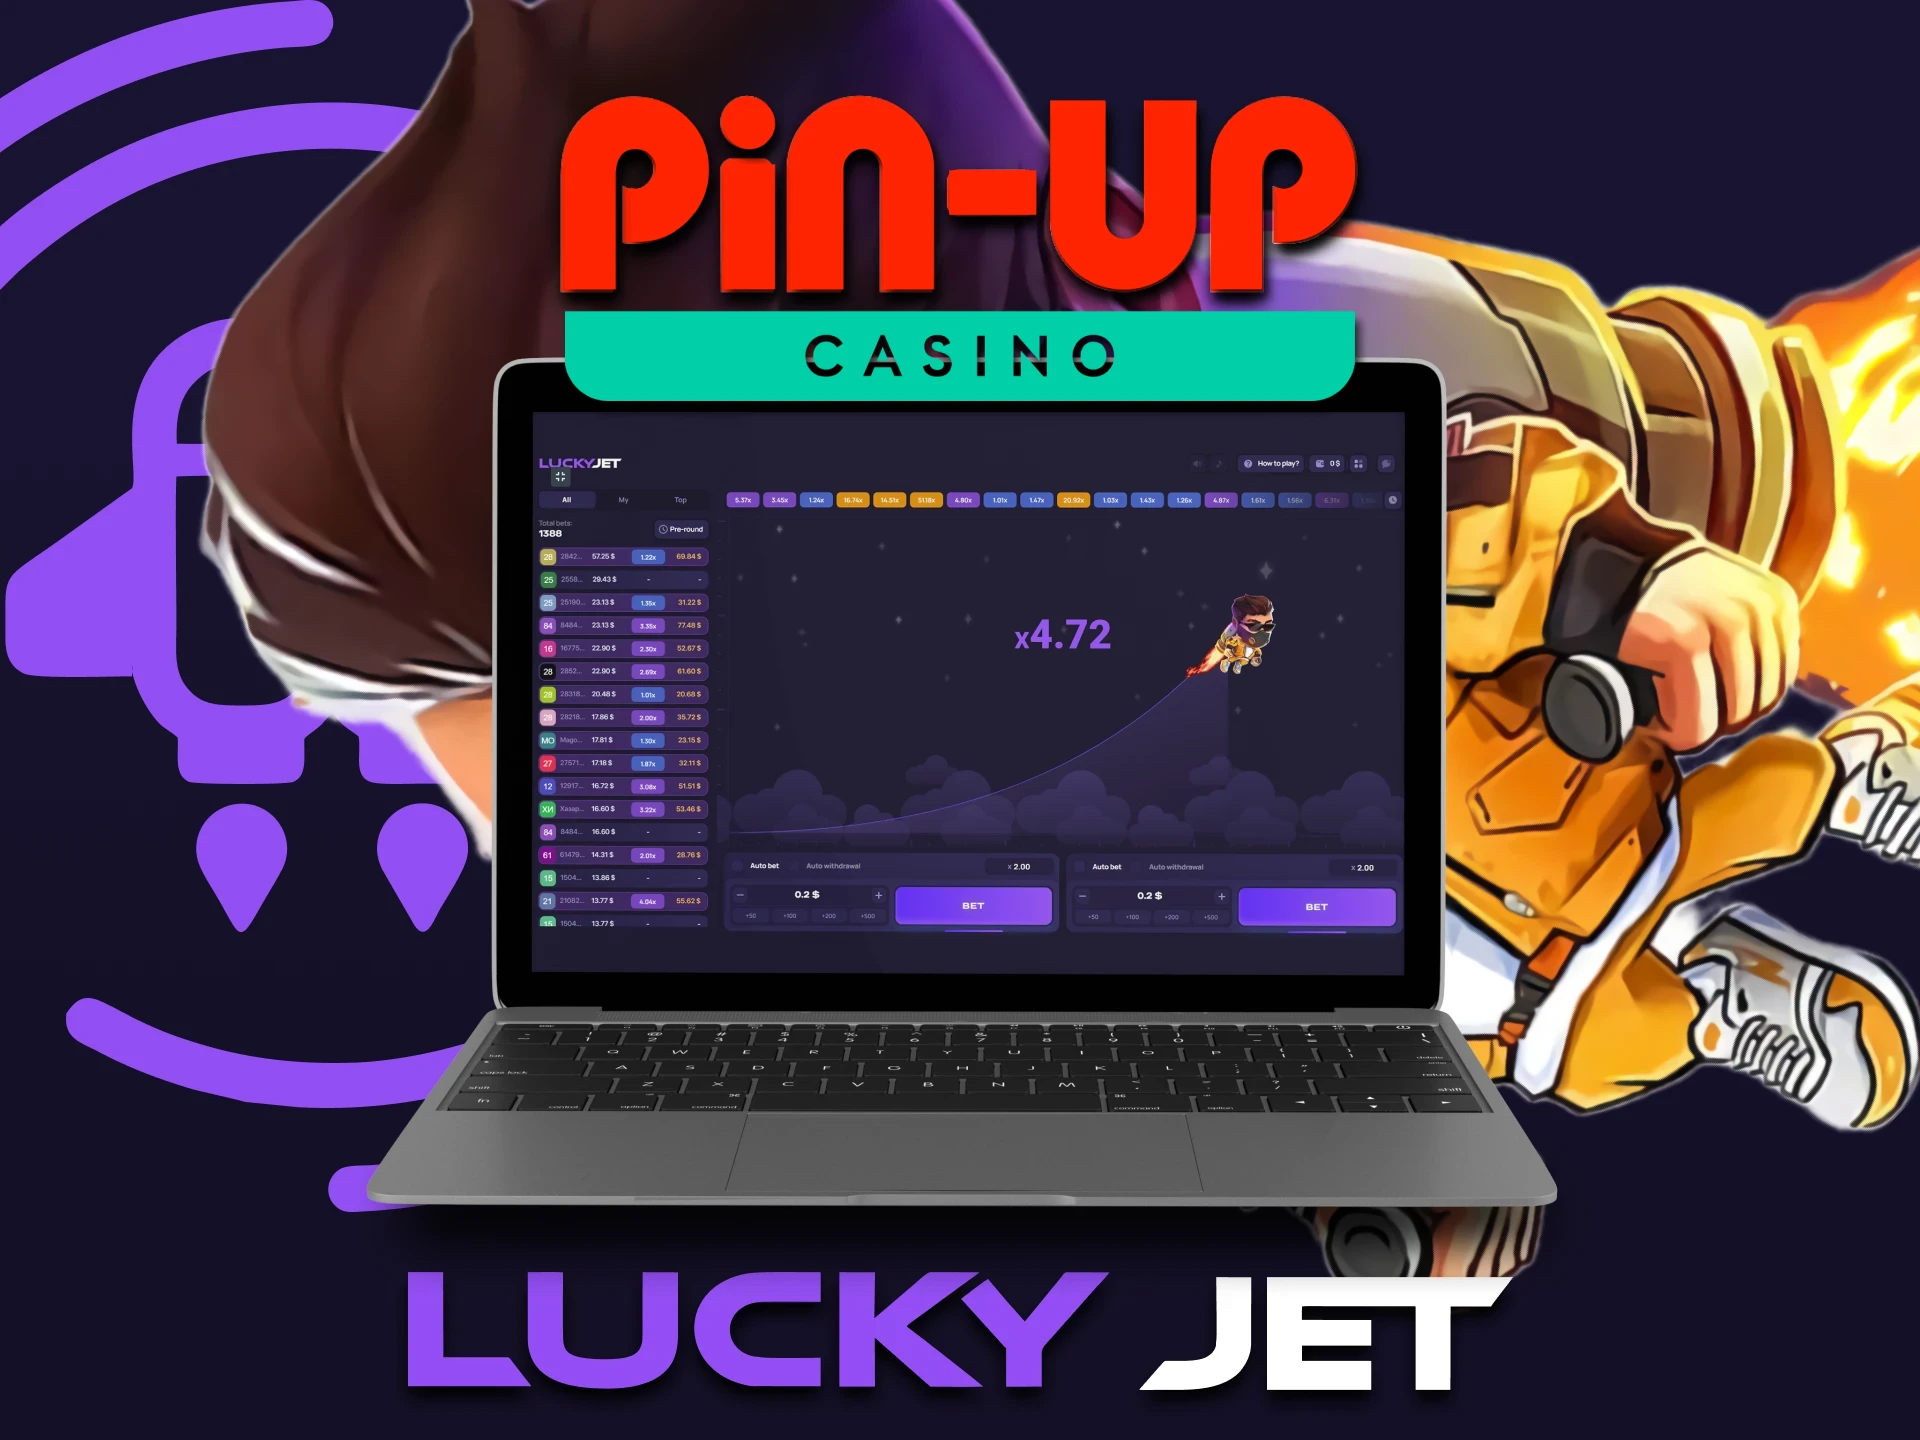 Use the Pin Up service to play Lucky Jet.